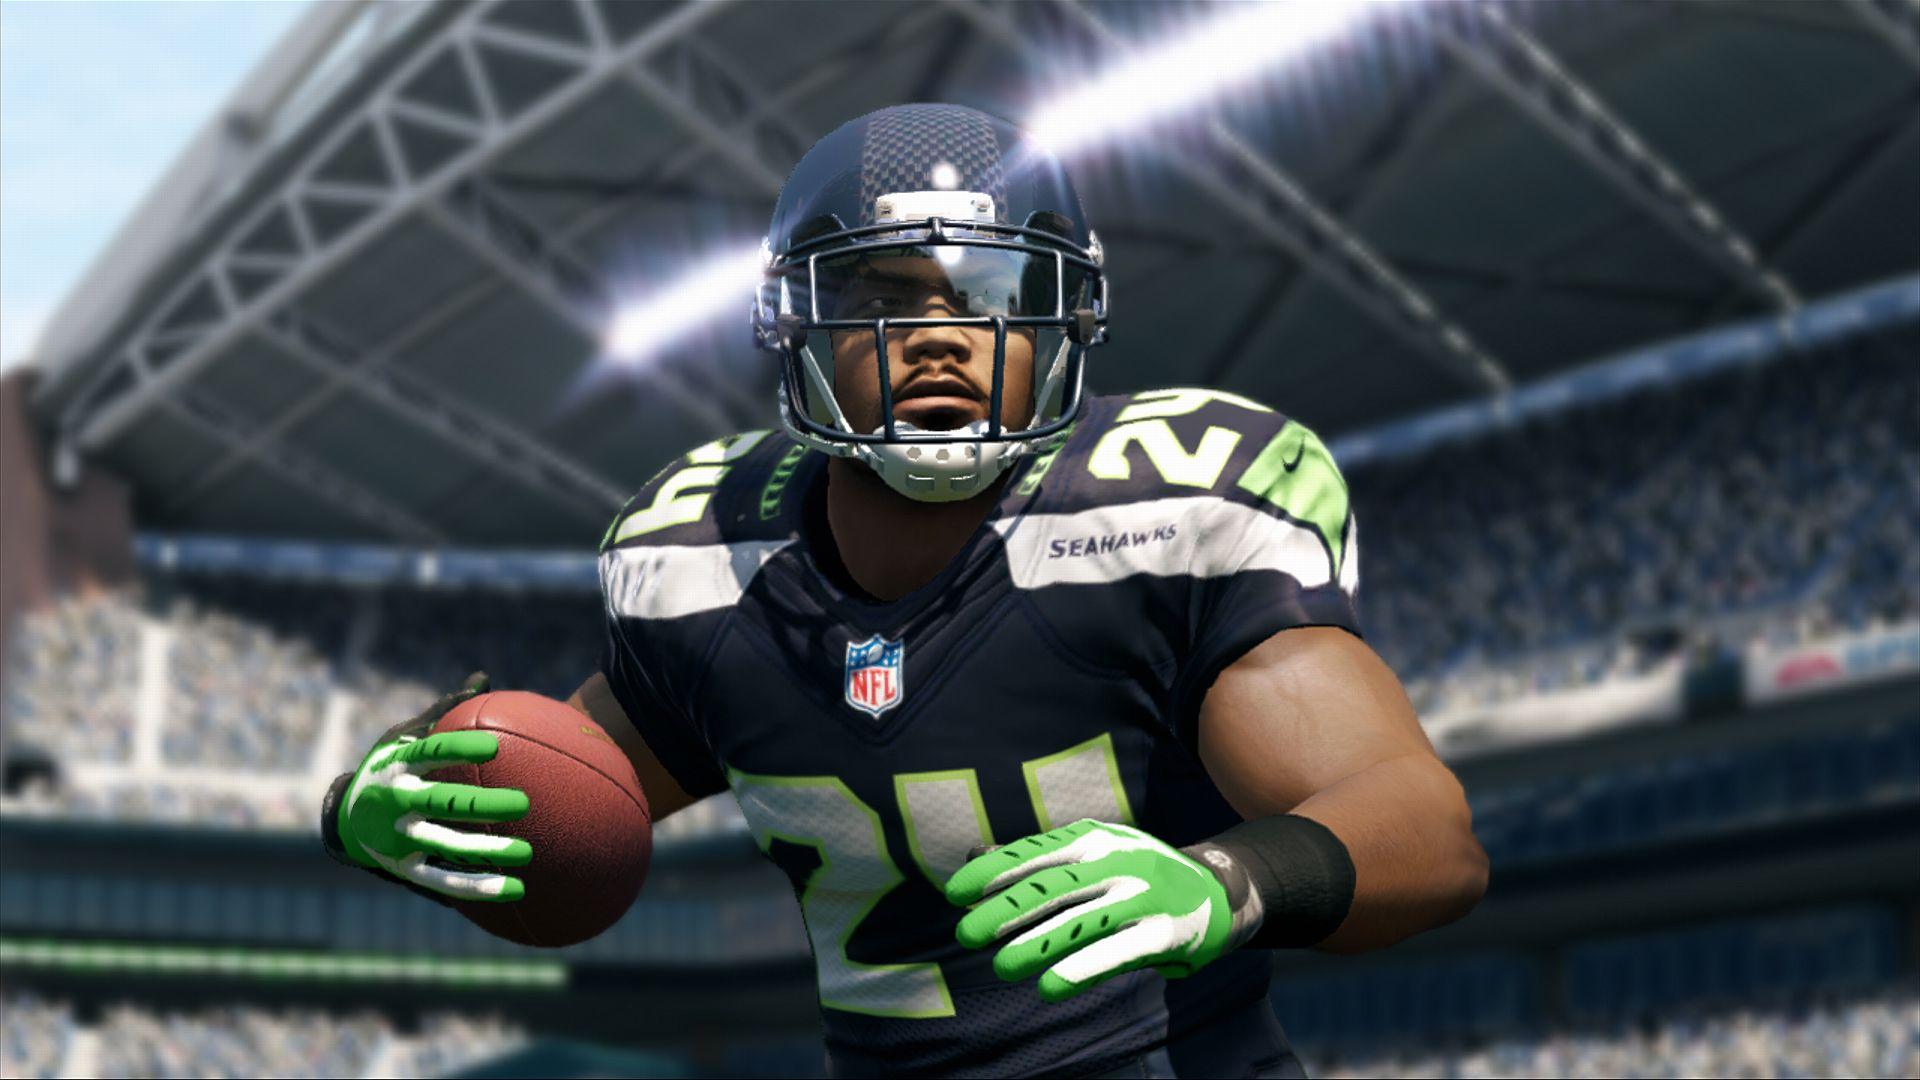 Madden NFL 13 Ratings For the Running Back with Highest